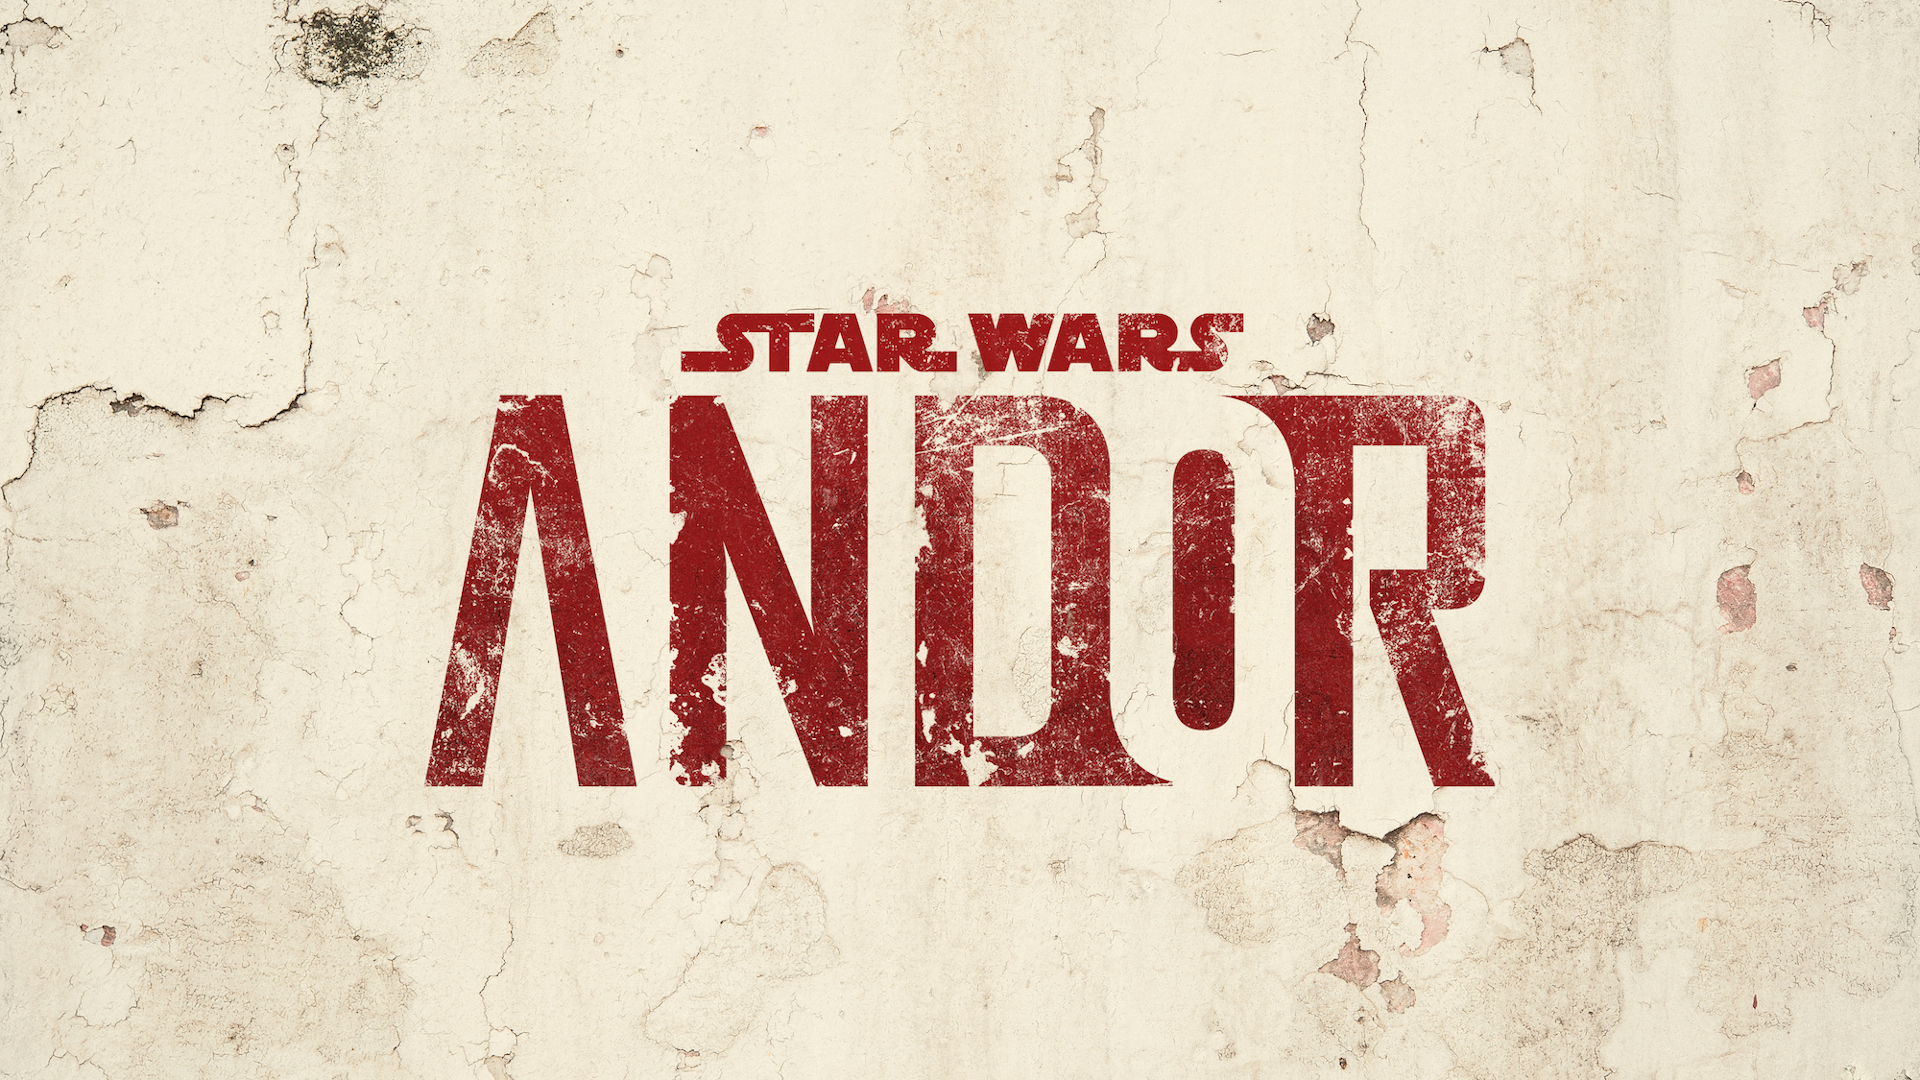 Andor Gets Second Highest Show Rating in Star Wars History, Second